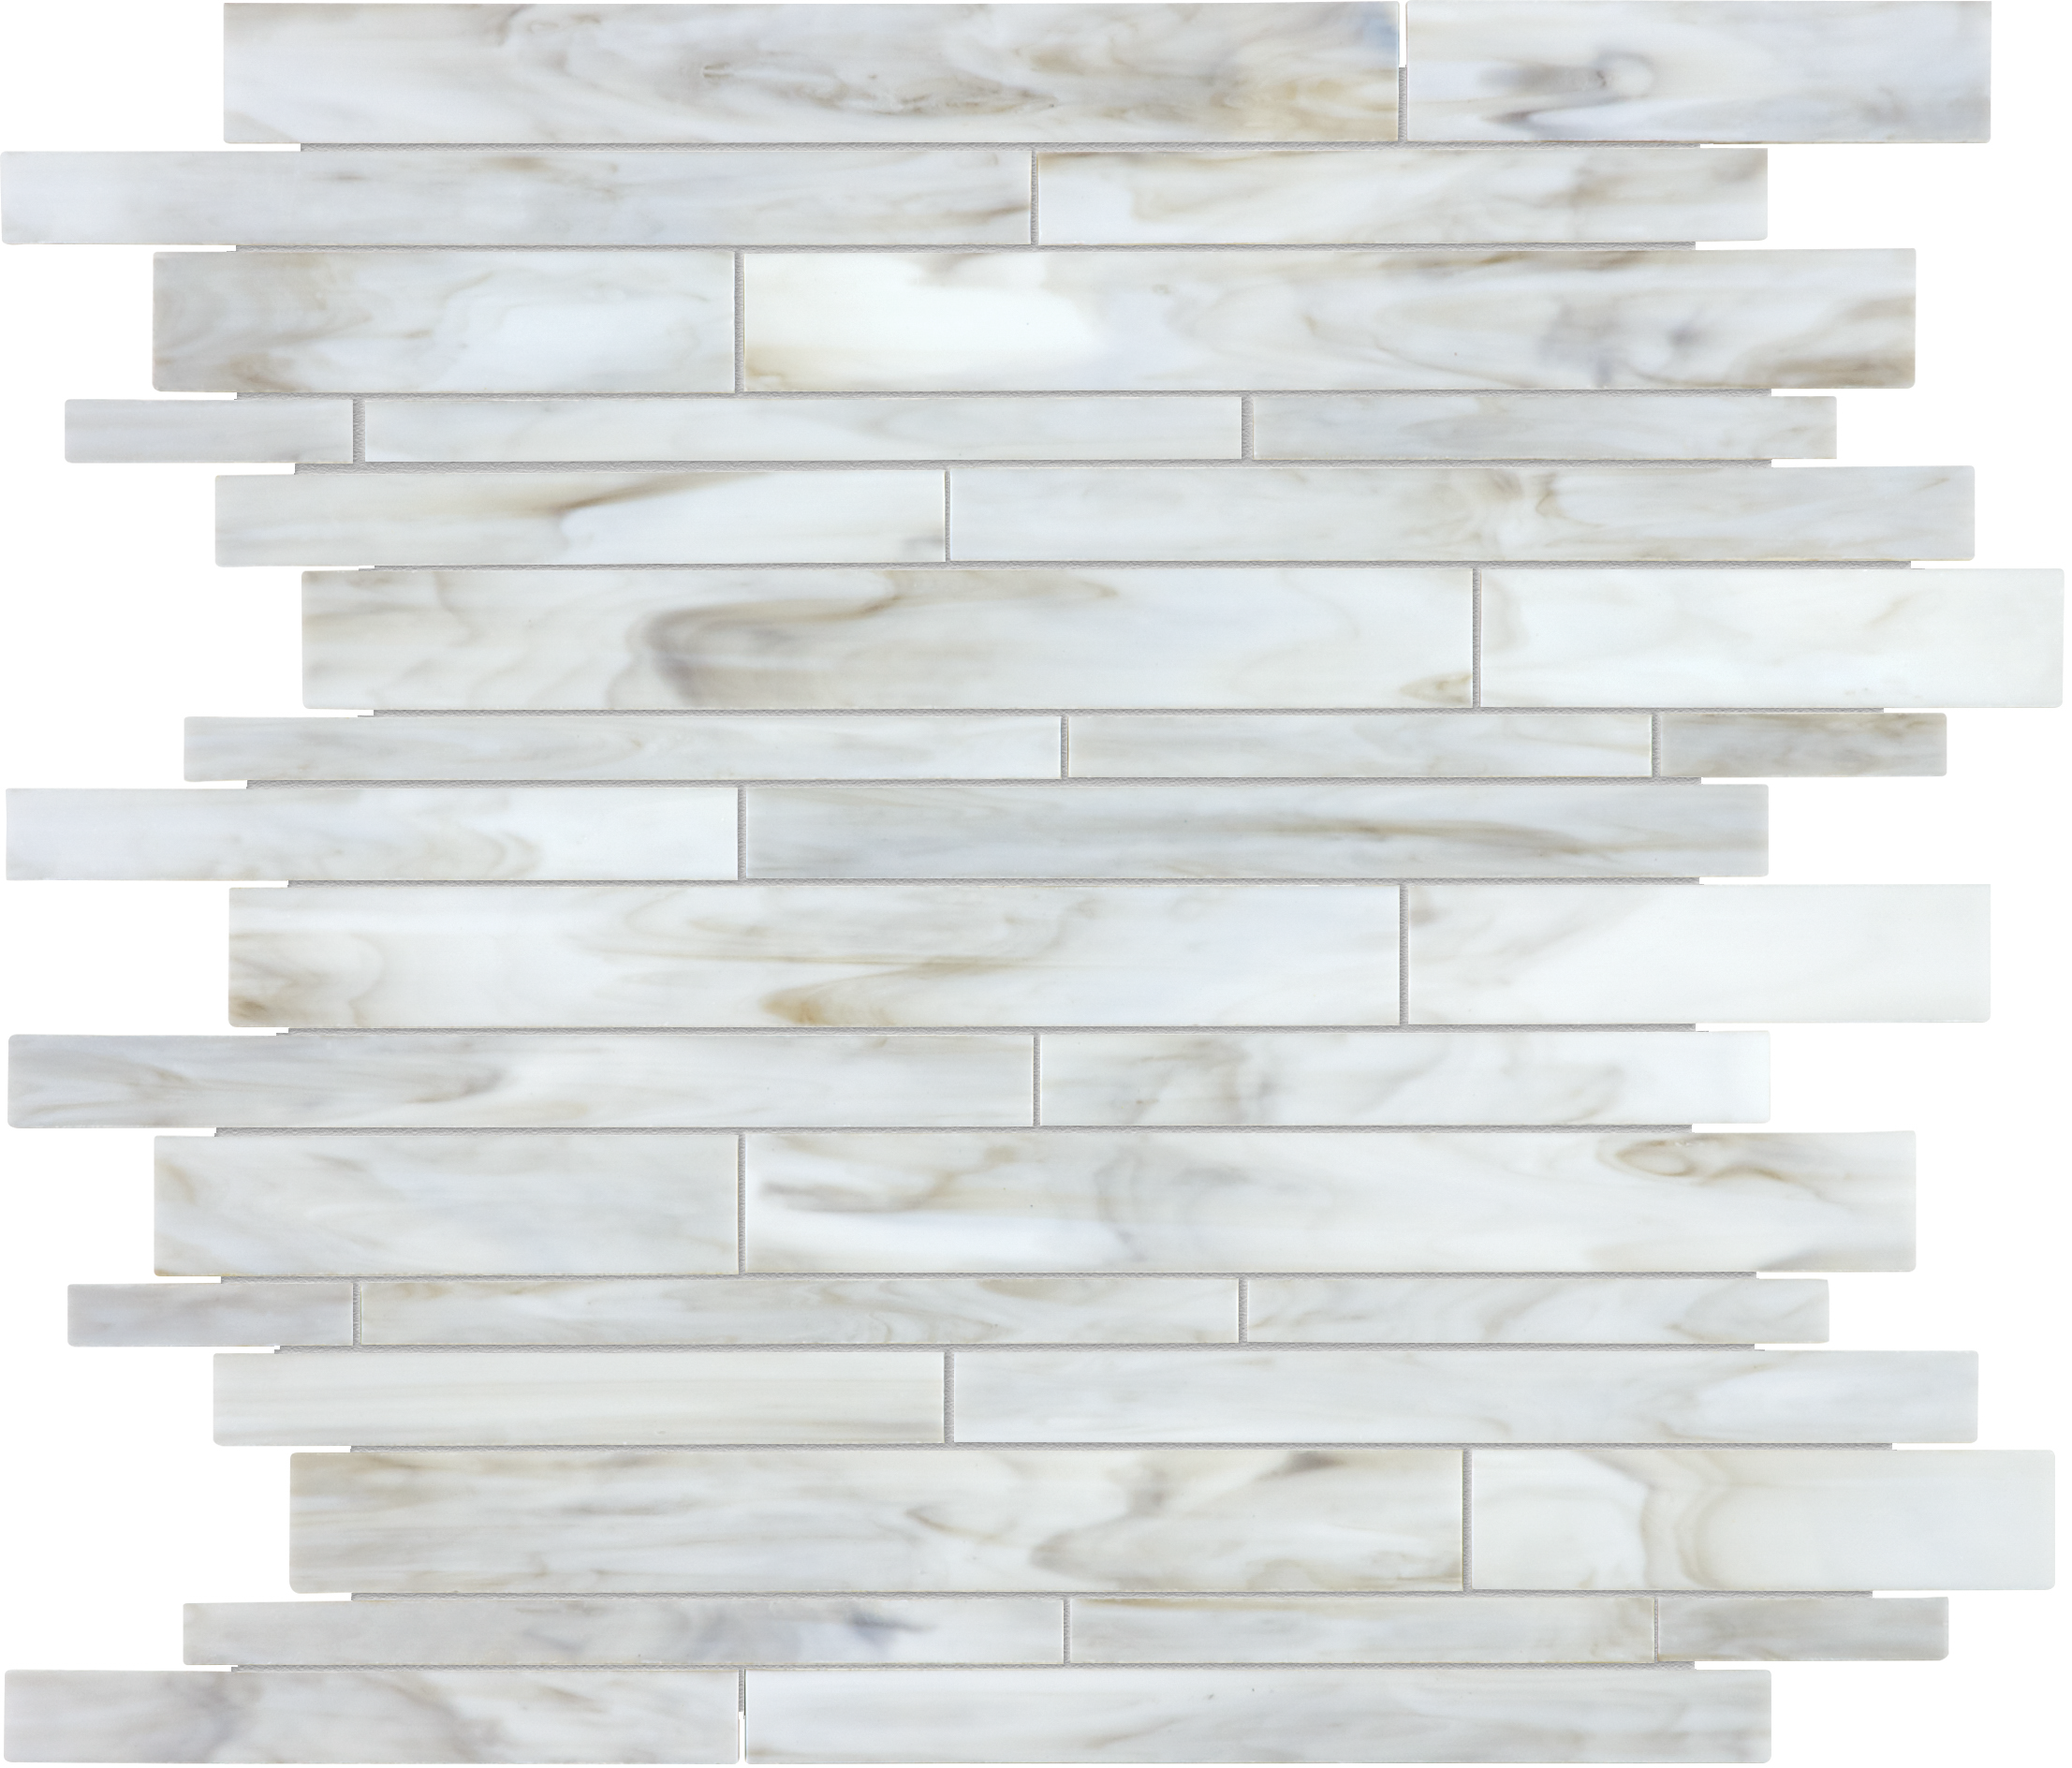 calacatta random strip pattern fused glass mosaic from baroque anatolia collection distributed by surface group international glossy finish rounded edge mesh shape